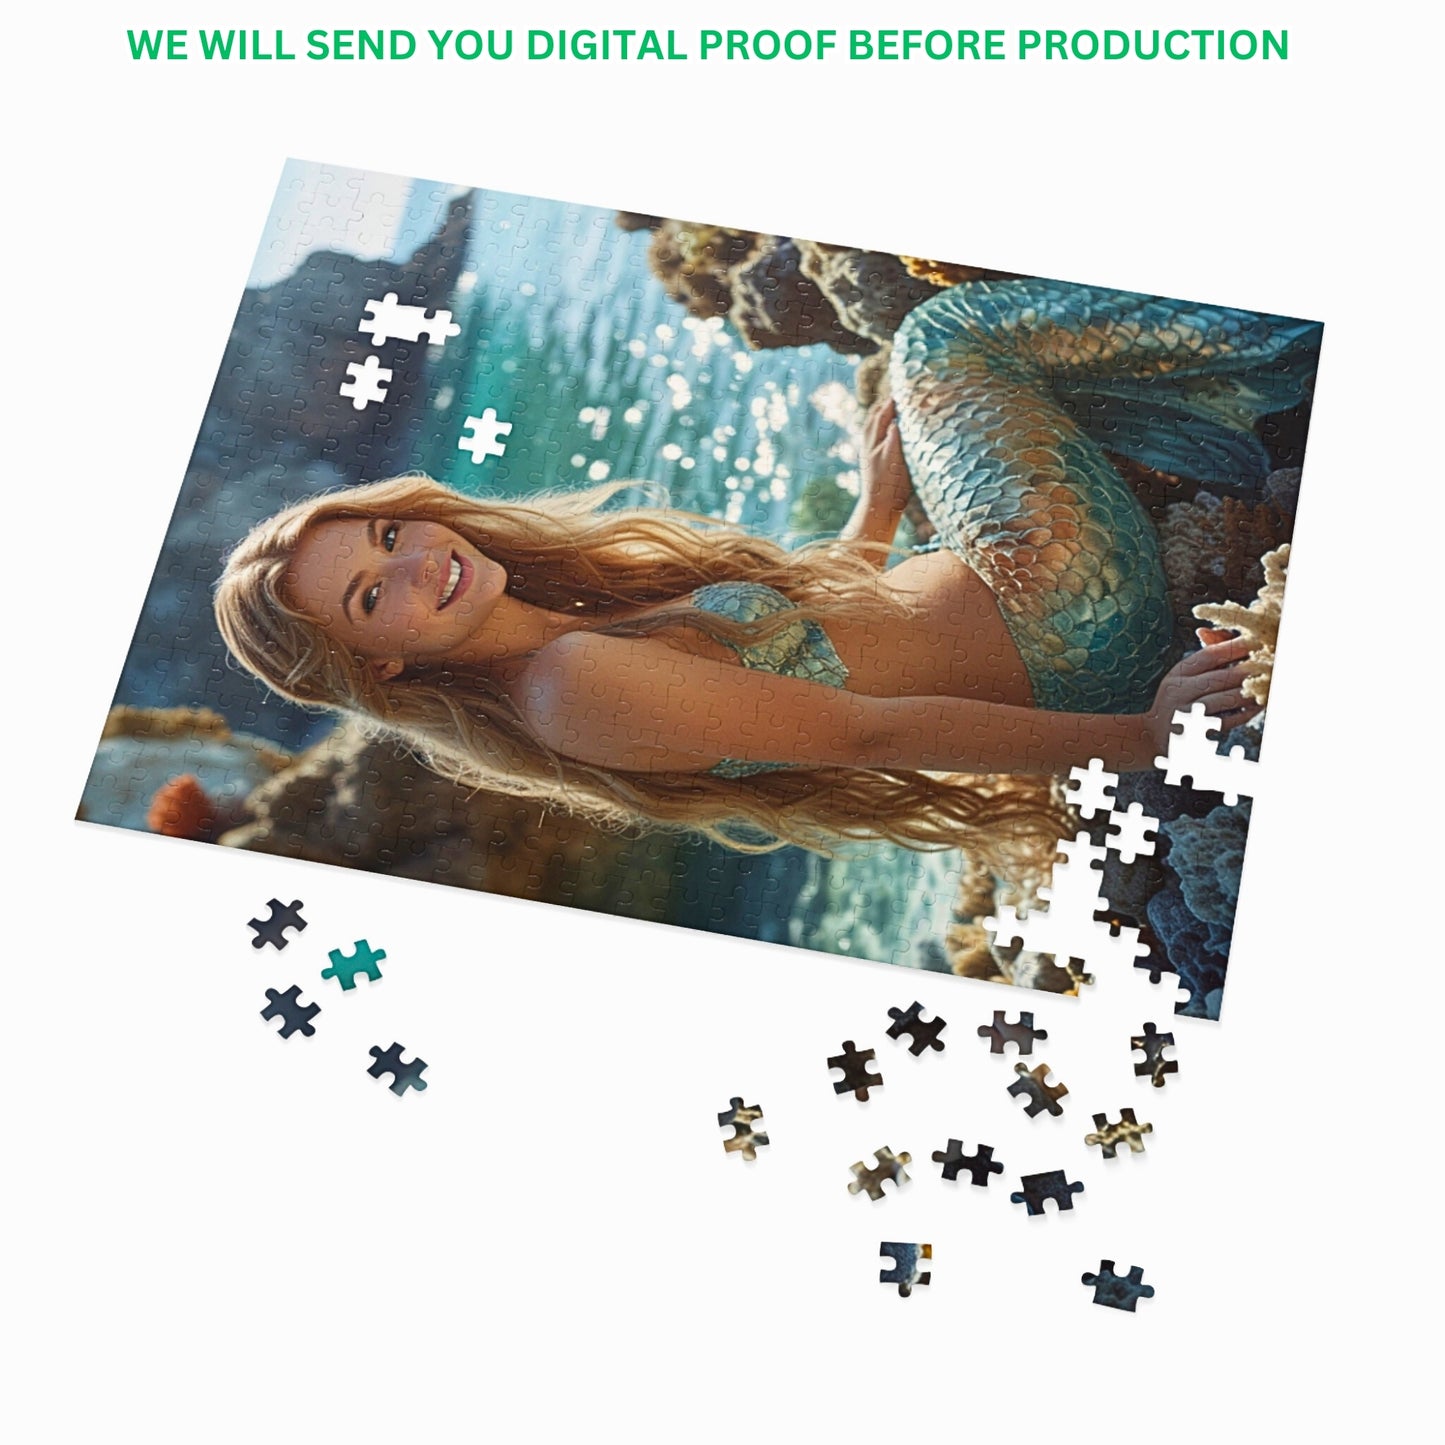 Transform cherished memories into a custom mermaid puzzle! Personalize your puzzle with a princess portrait for a unique birthday gift. Choose from 250 to 1000 pieces. Lady mermaid gifts, princess gifts, and mermaid photo gifts available. Turn any photo into a custom mermaid art puzzle. Ideal for mermaid and princess enthusiasts. Order your personalized puzzle today!